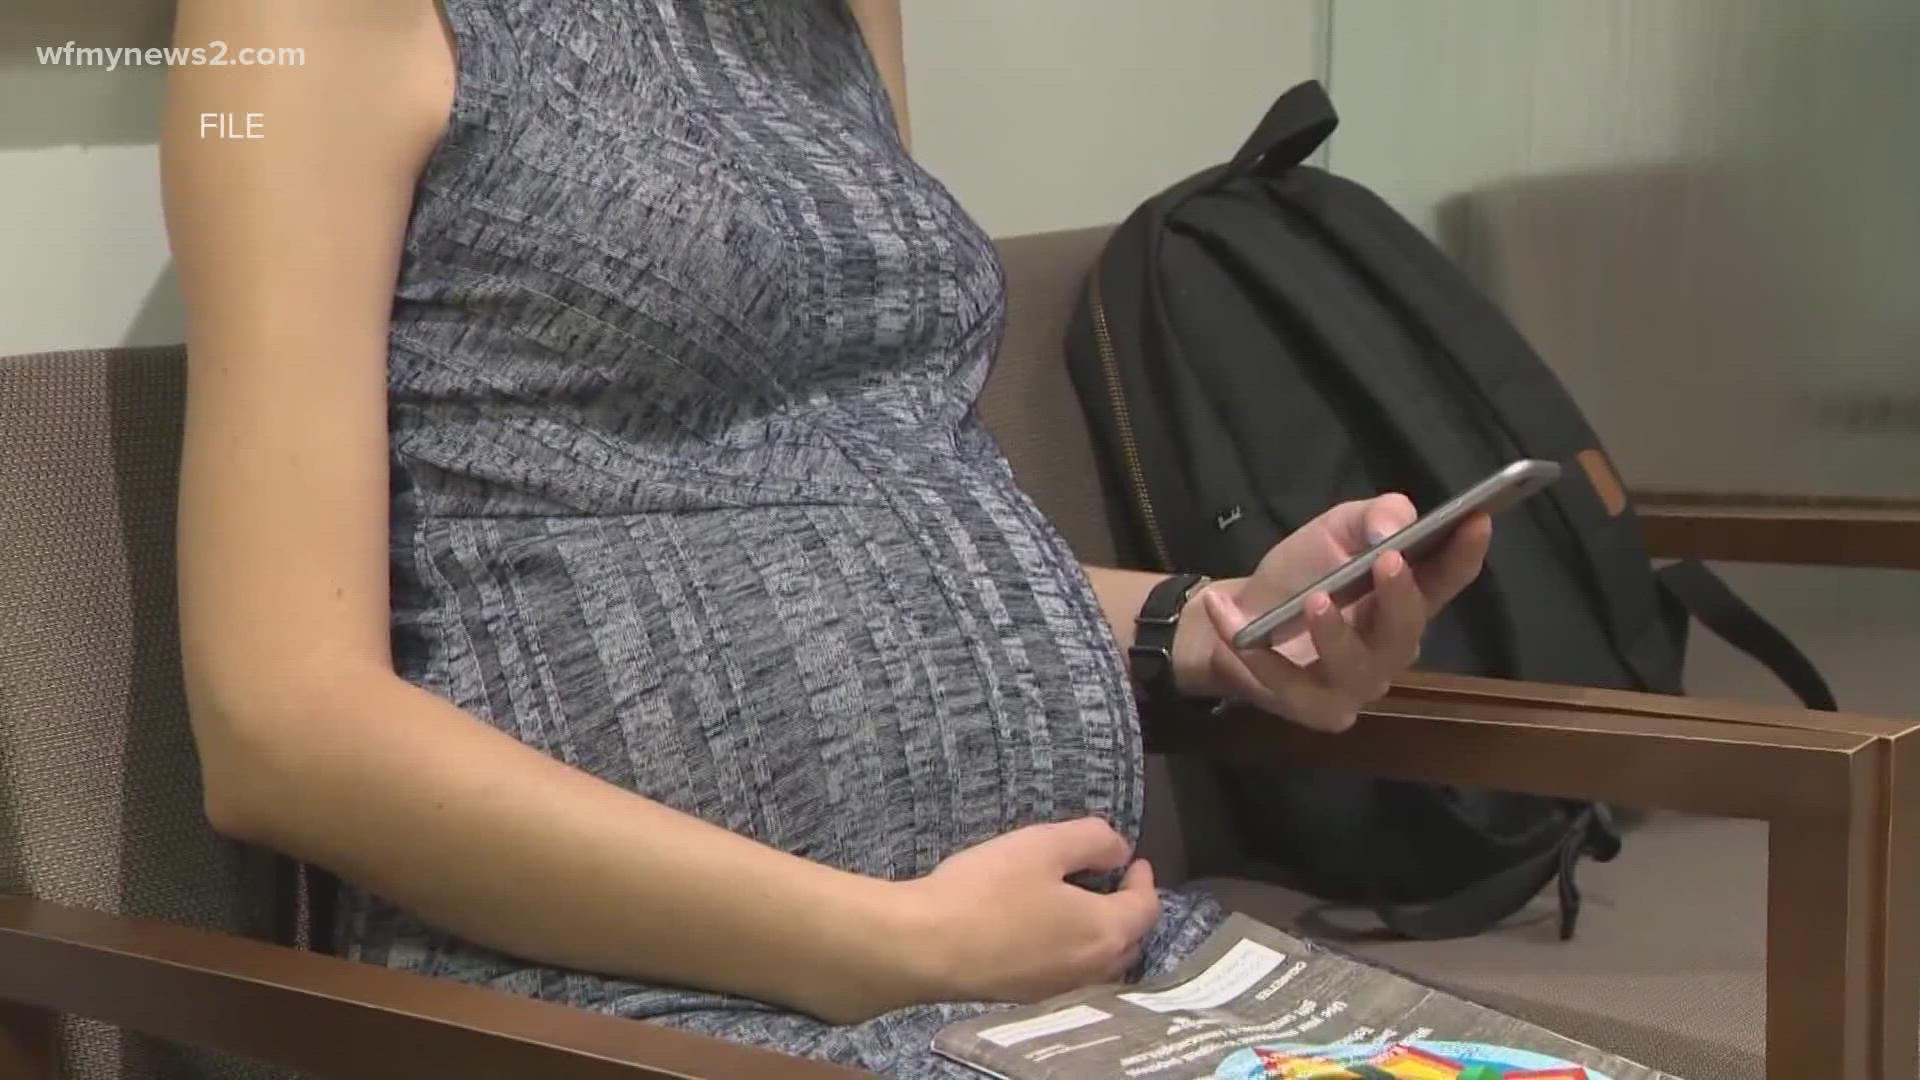 With the delta variant spreading, doctors say they’re seeing a higher rate of severe disease in pregnant people.